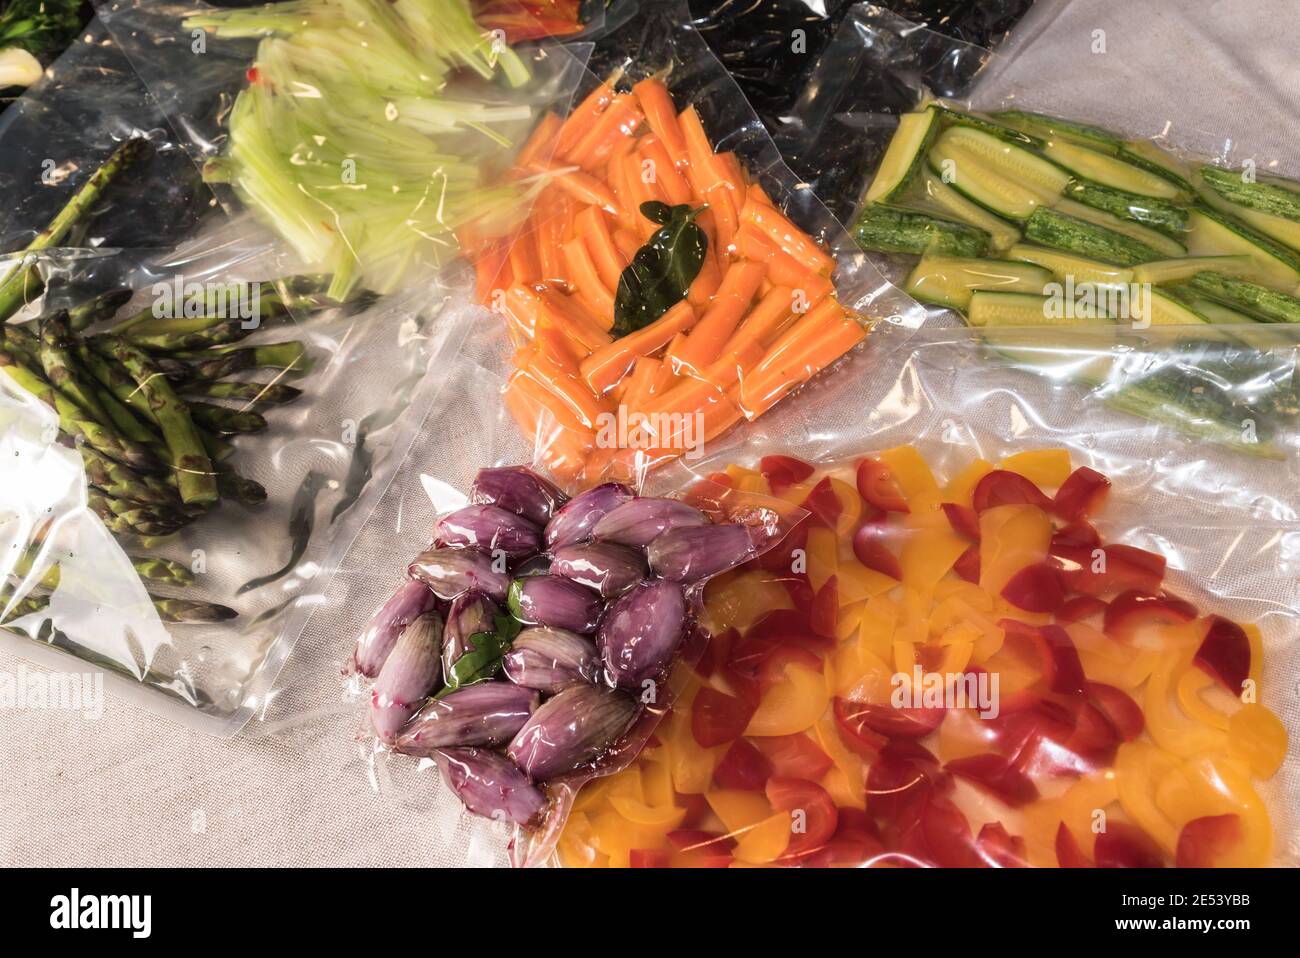 https://c8.alamy.com/comp/2E53YBB/vacuum-sealed-bags-for-sous-vide-cooking-with-peppers-and-courgettes-and-shallots-fresh-carrots-and-asparagus-2E53YBB.jpg